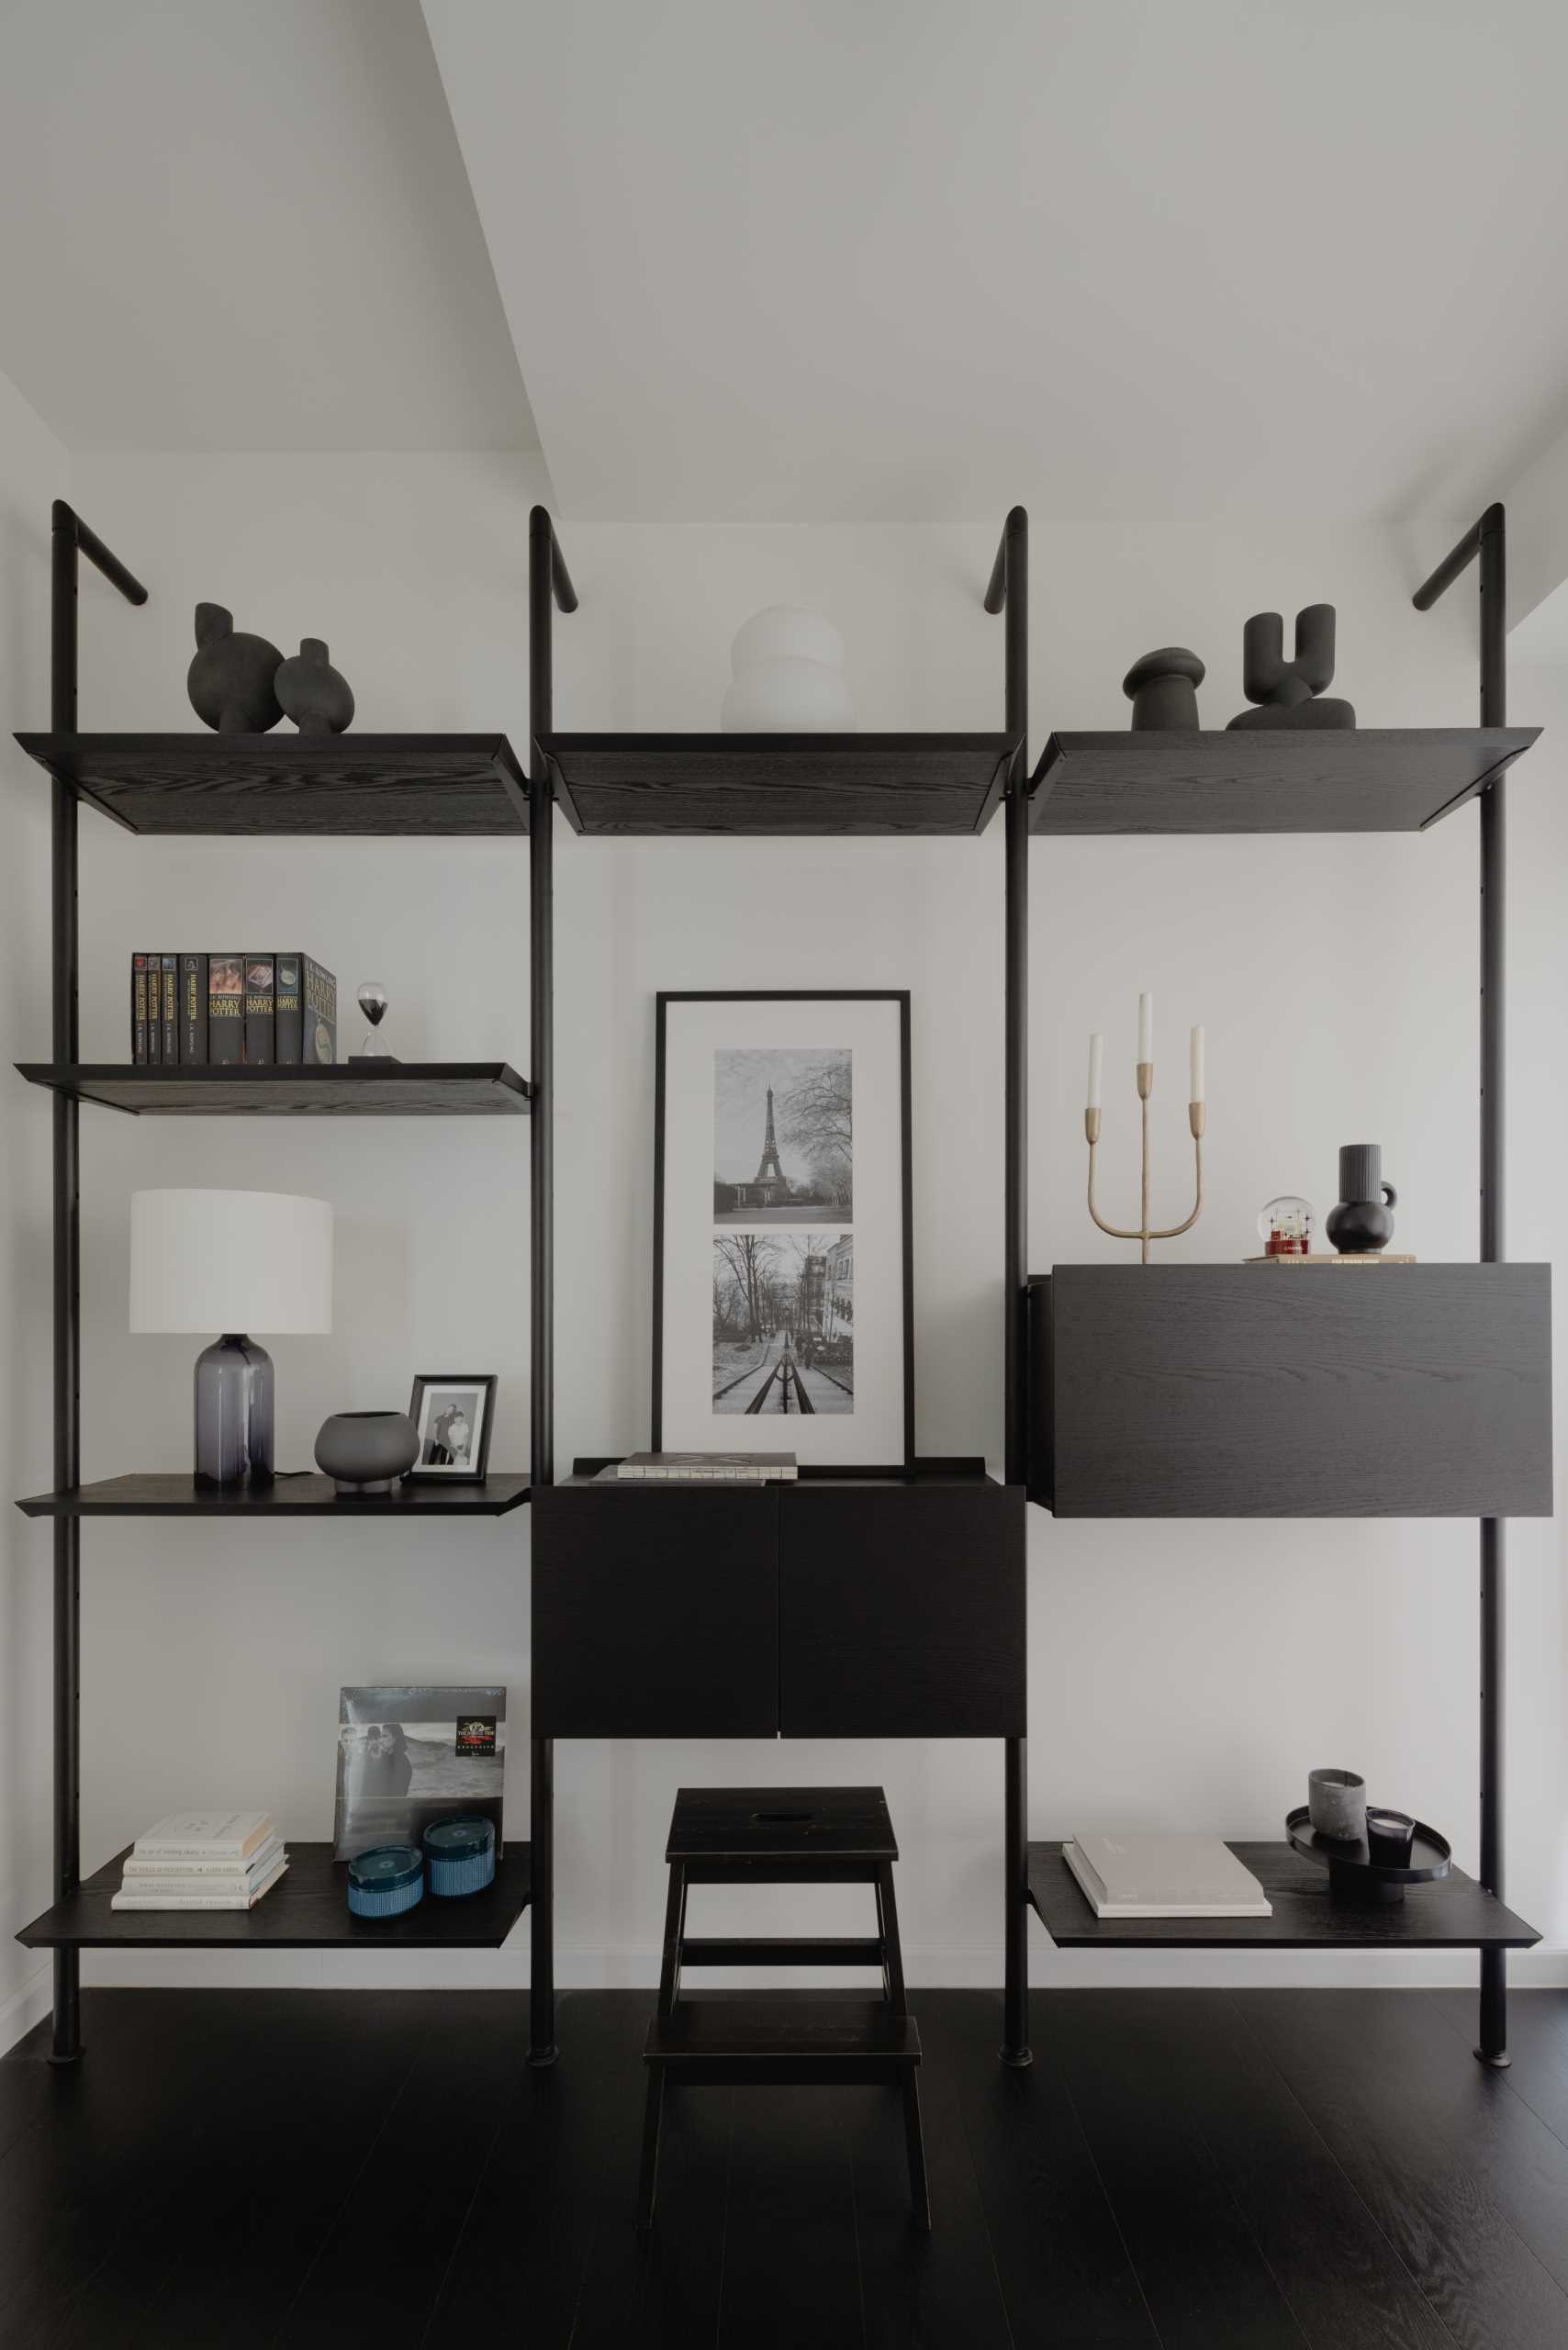 In this monochrome home office, there's a desk by the window, while a shelving unit along the wall showcases additional decorative items and also provides some cabinetry for hidden storage.